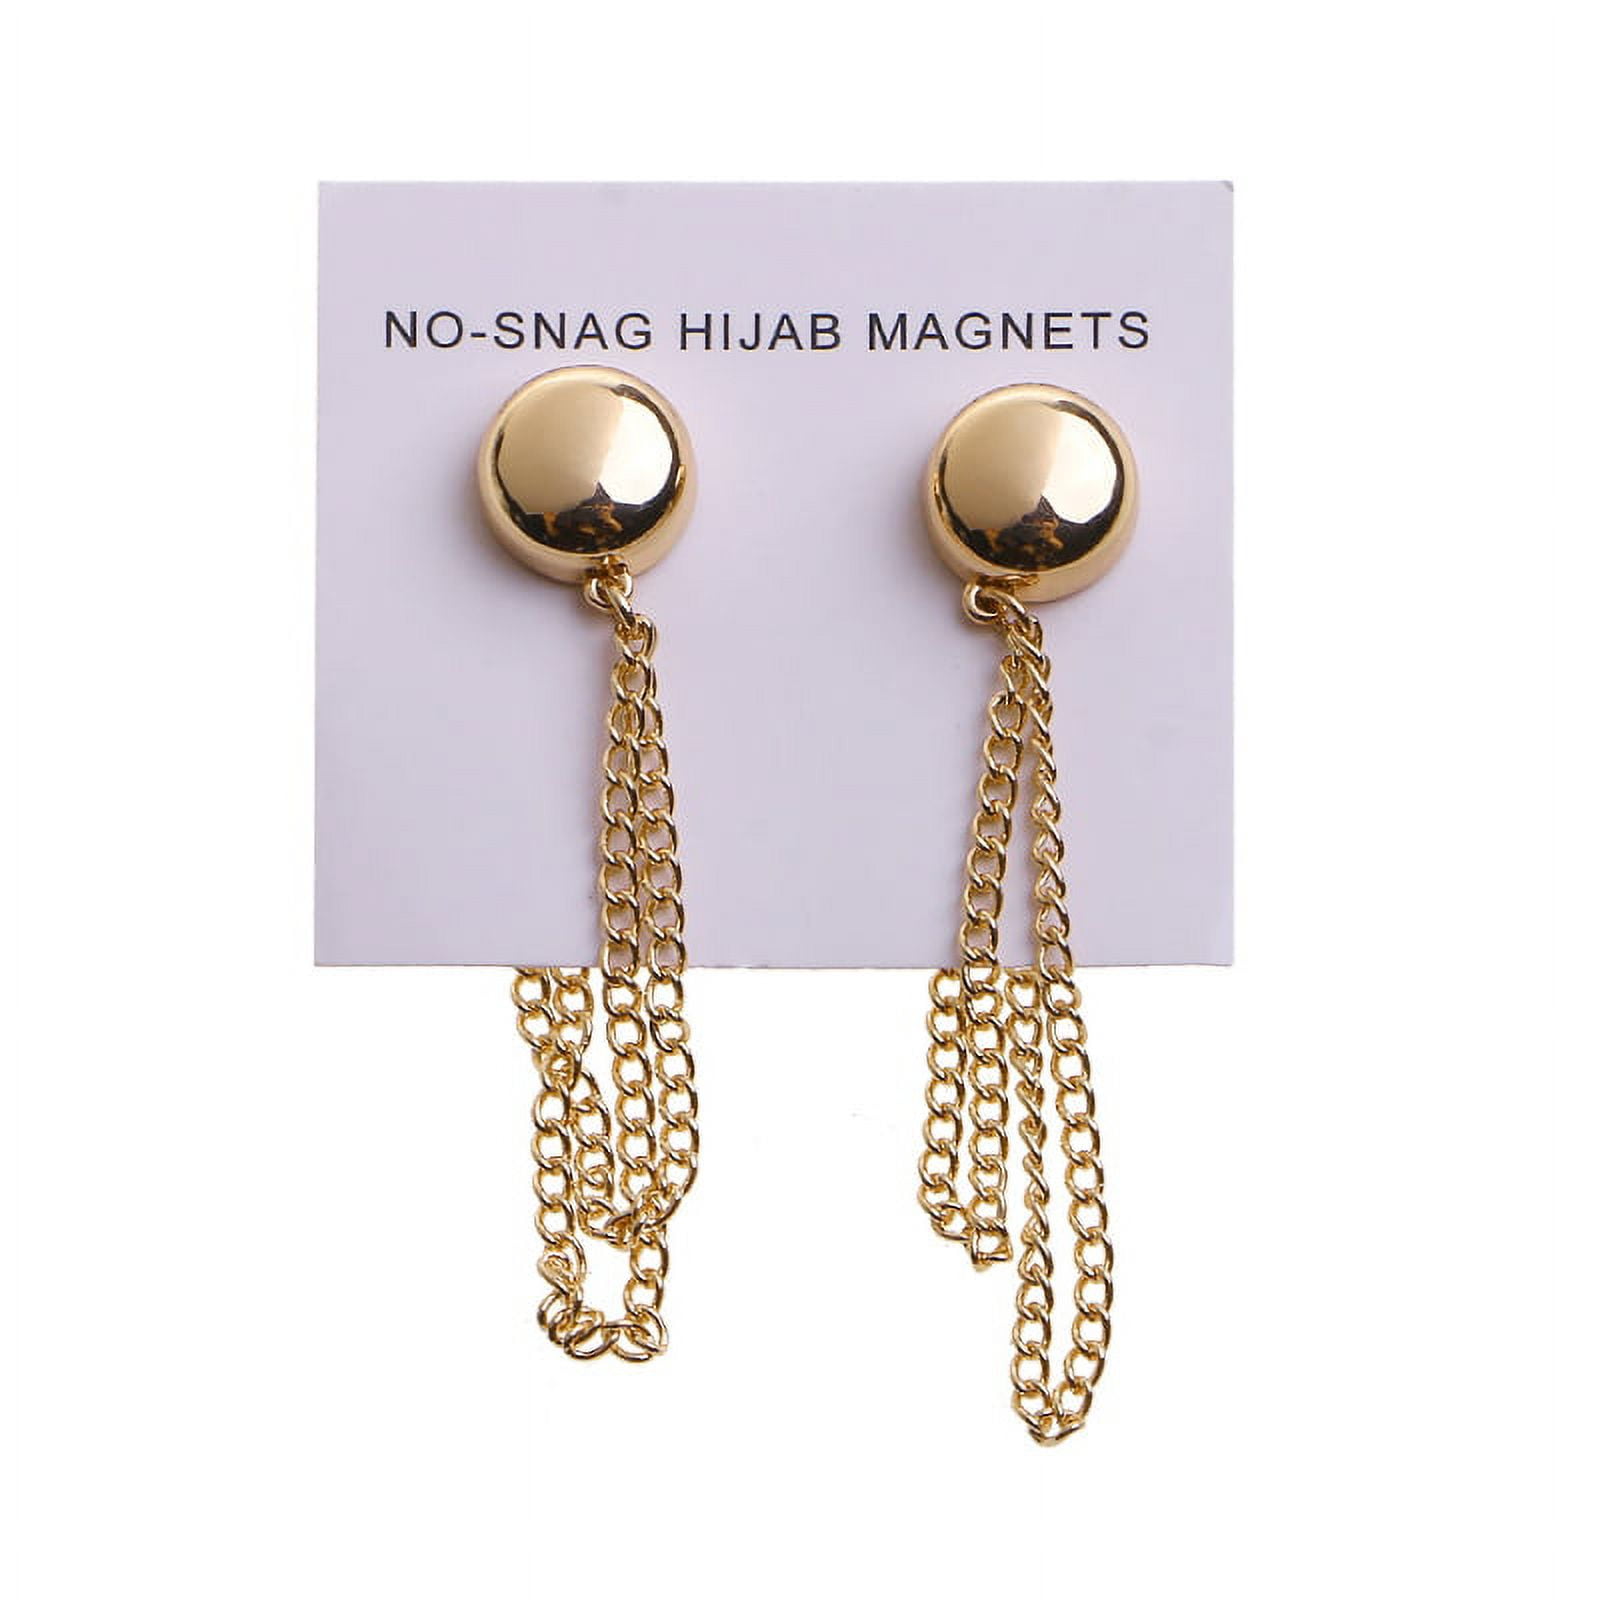 Round Metal Tags Charms For Jewelry Making Gold Metal Hijab